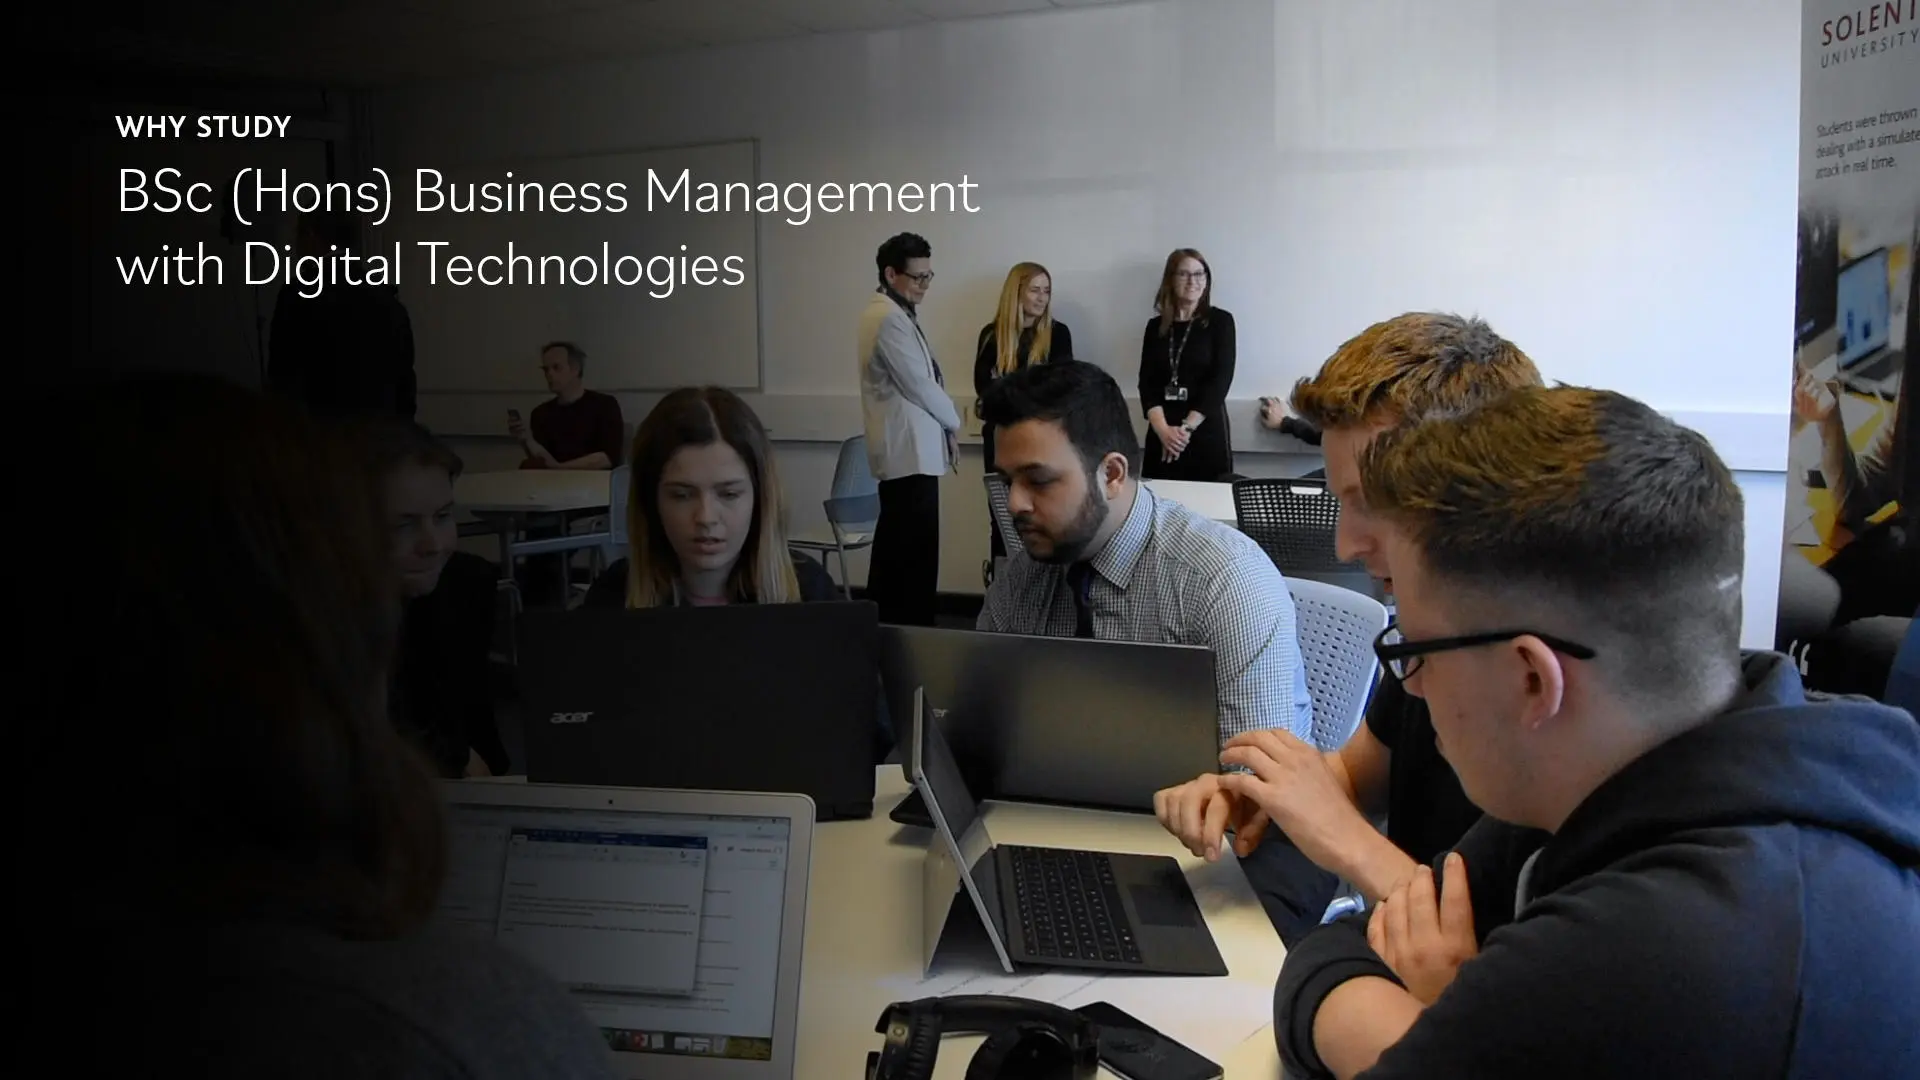 Image of students in a classroom working at computers, alongside text that says 'Why study BSc (Hons) Business Management with Digital Technologies'. 